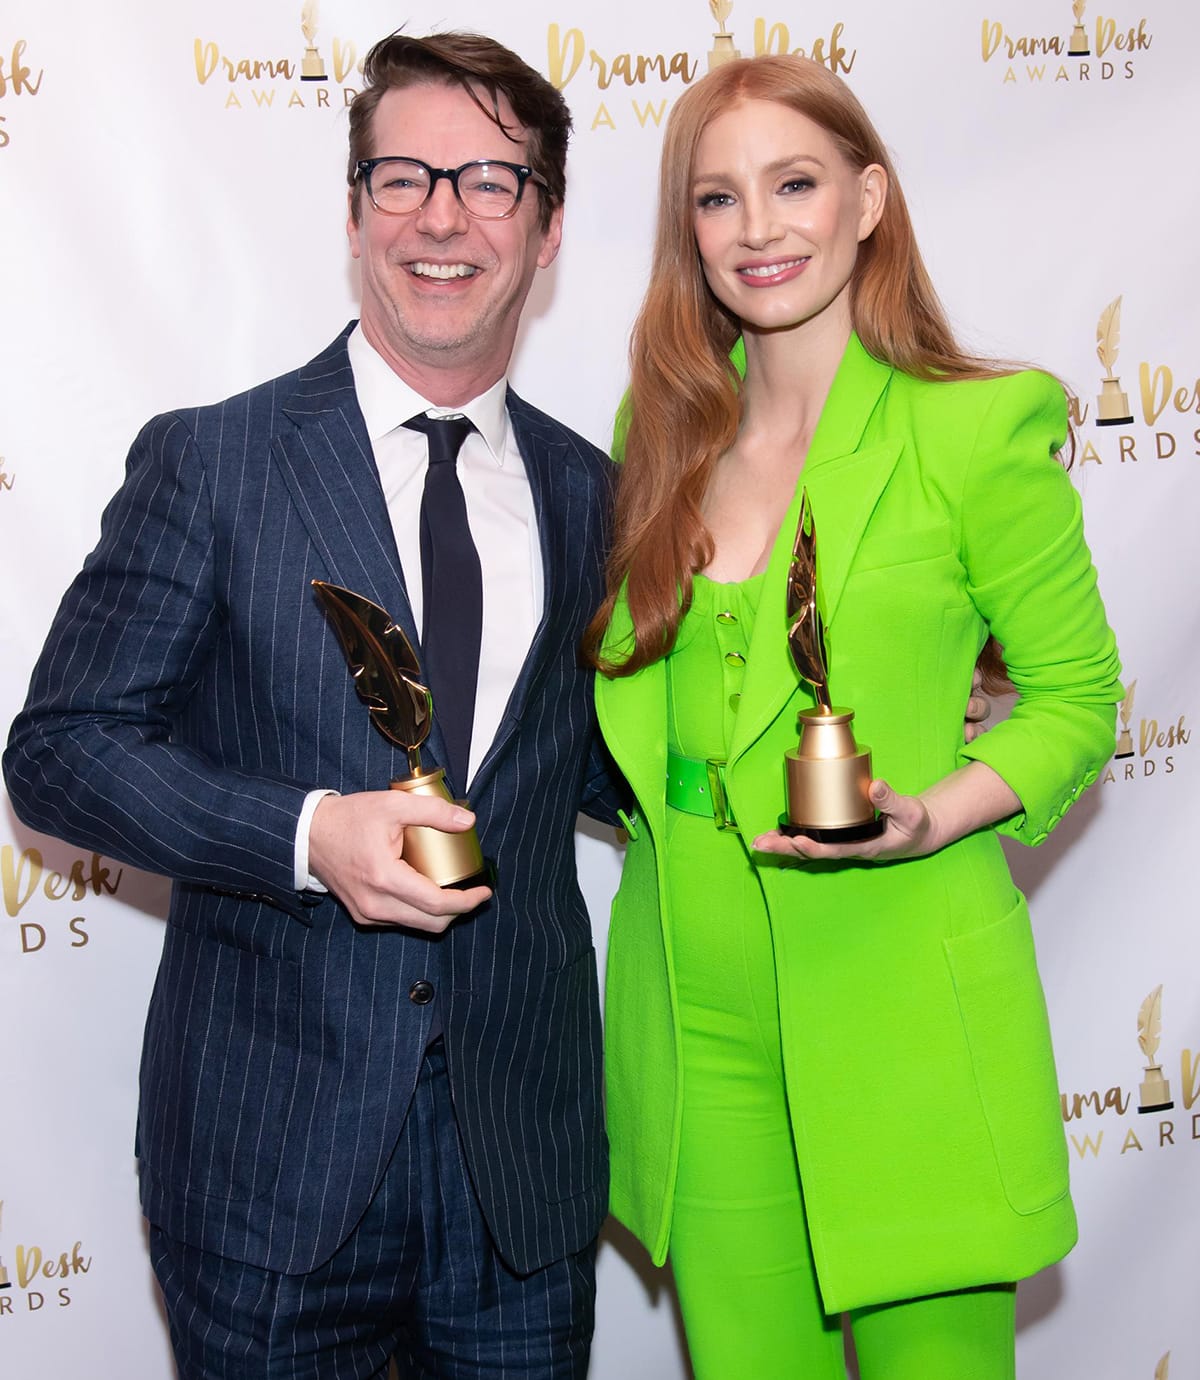 Sean Hayes and Jessica Chastain win the Outstanding Lead Performance at the 2023 Drama Desk Awards at Sardi's in NYC on June 6, 2023